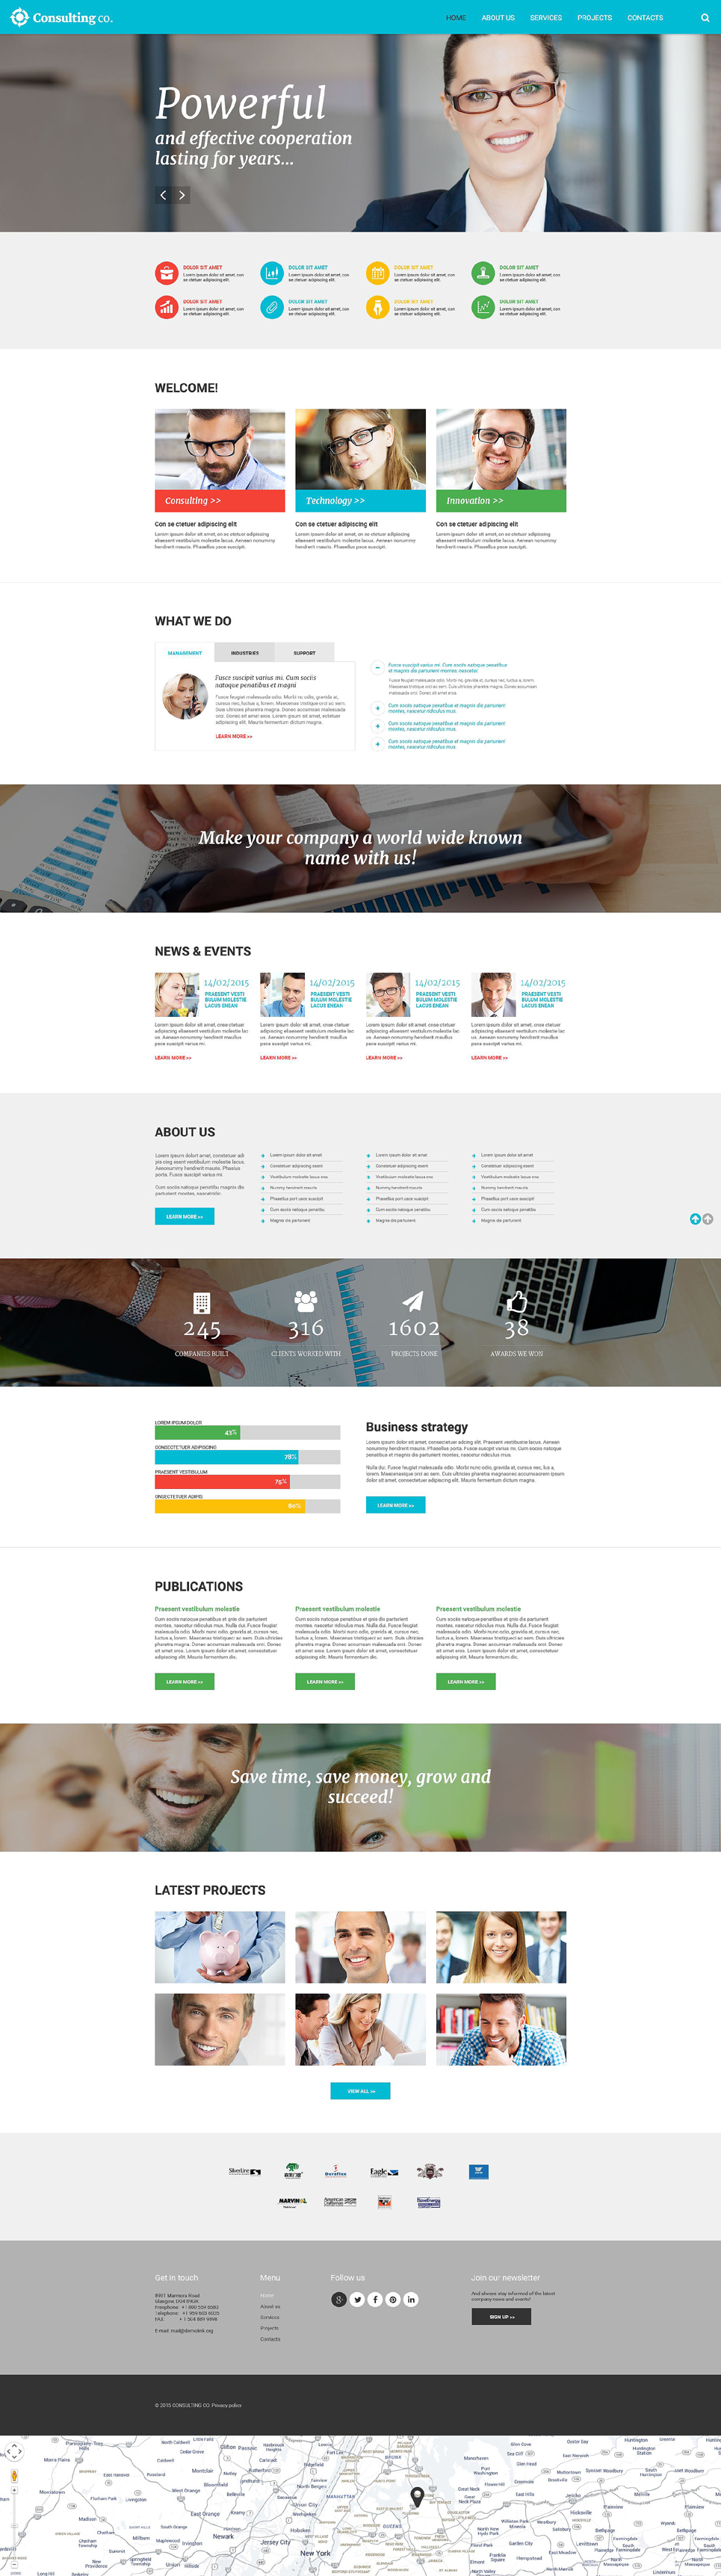 consulting-responsive-website-template-54807